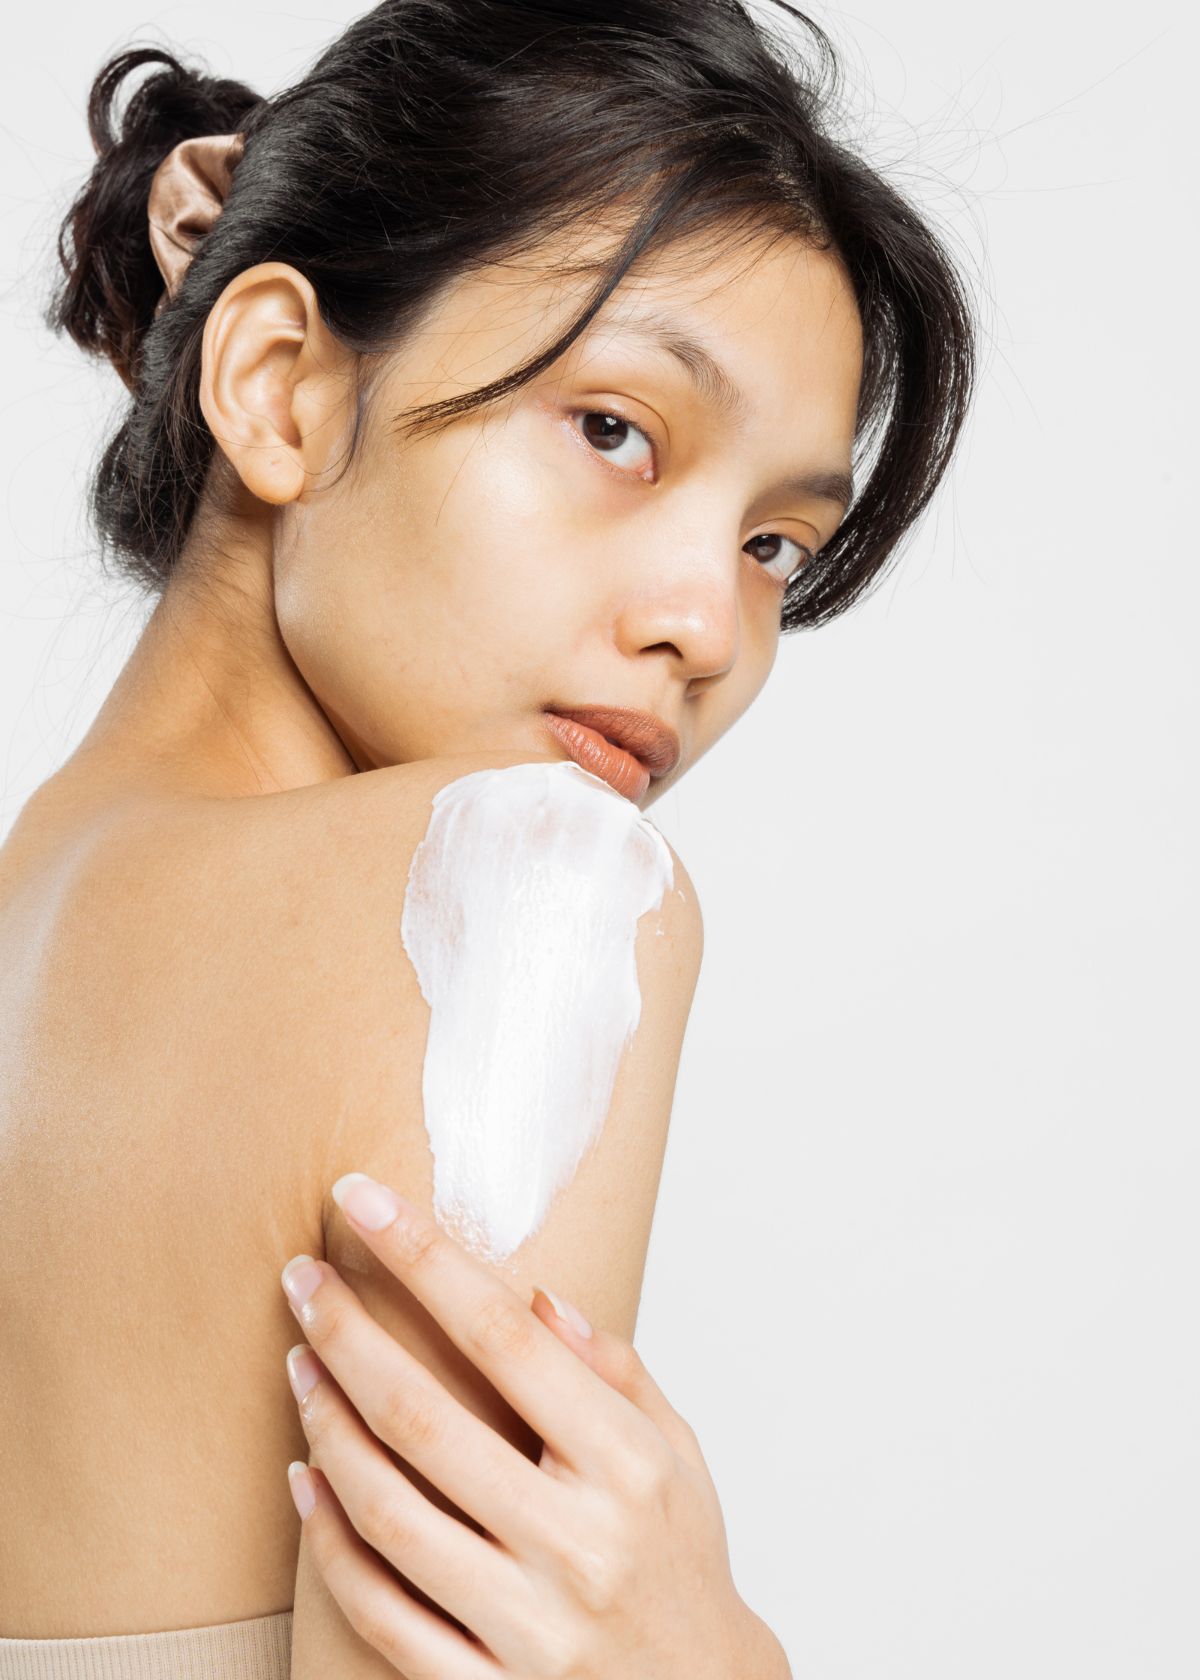 3 Best Korean Body Lotion to Keep Your Skin Bright and Smooth